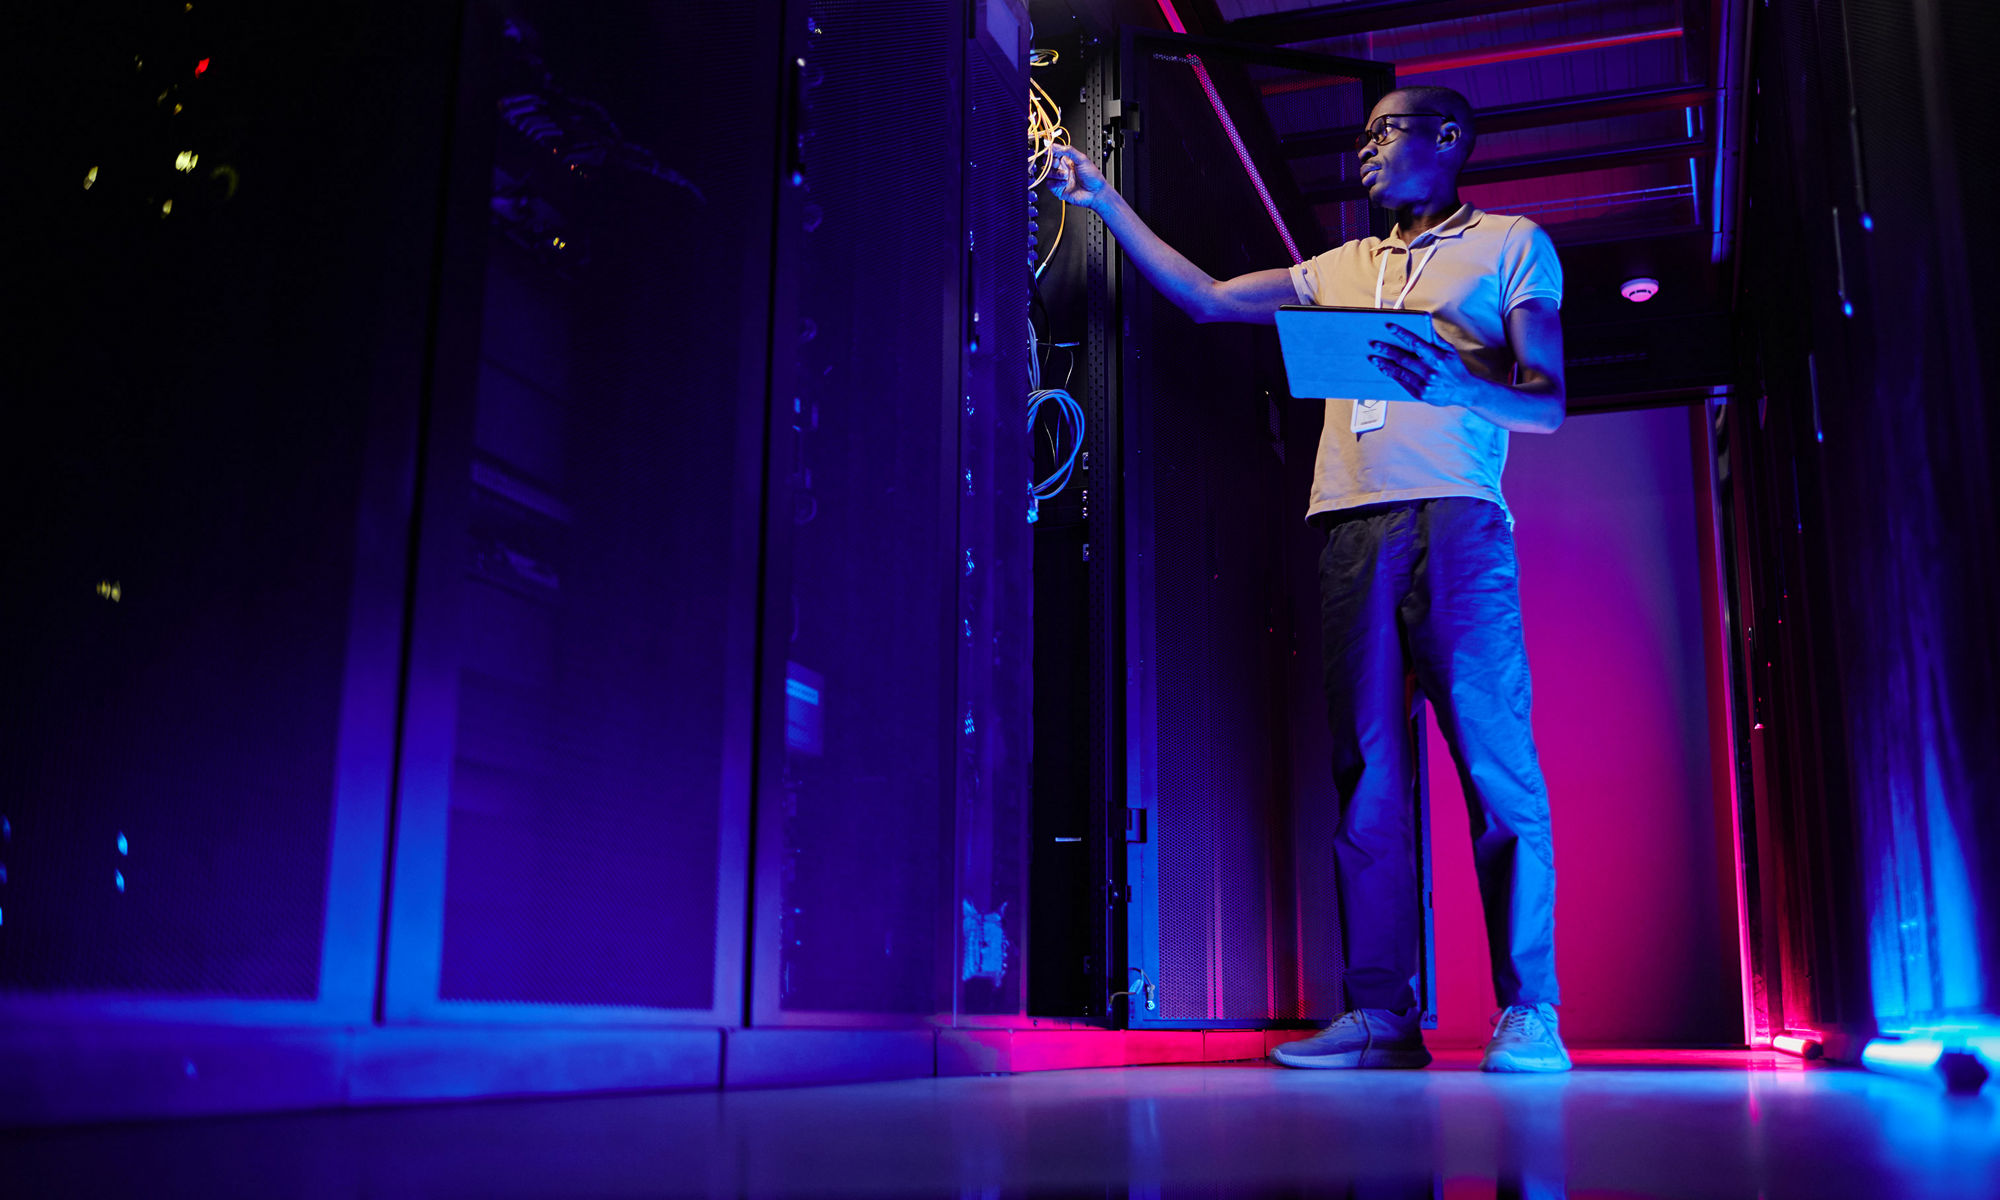 man standing in data center with purple lights glowing